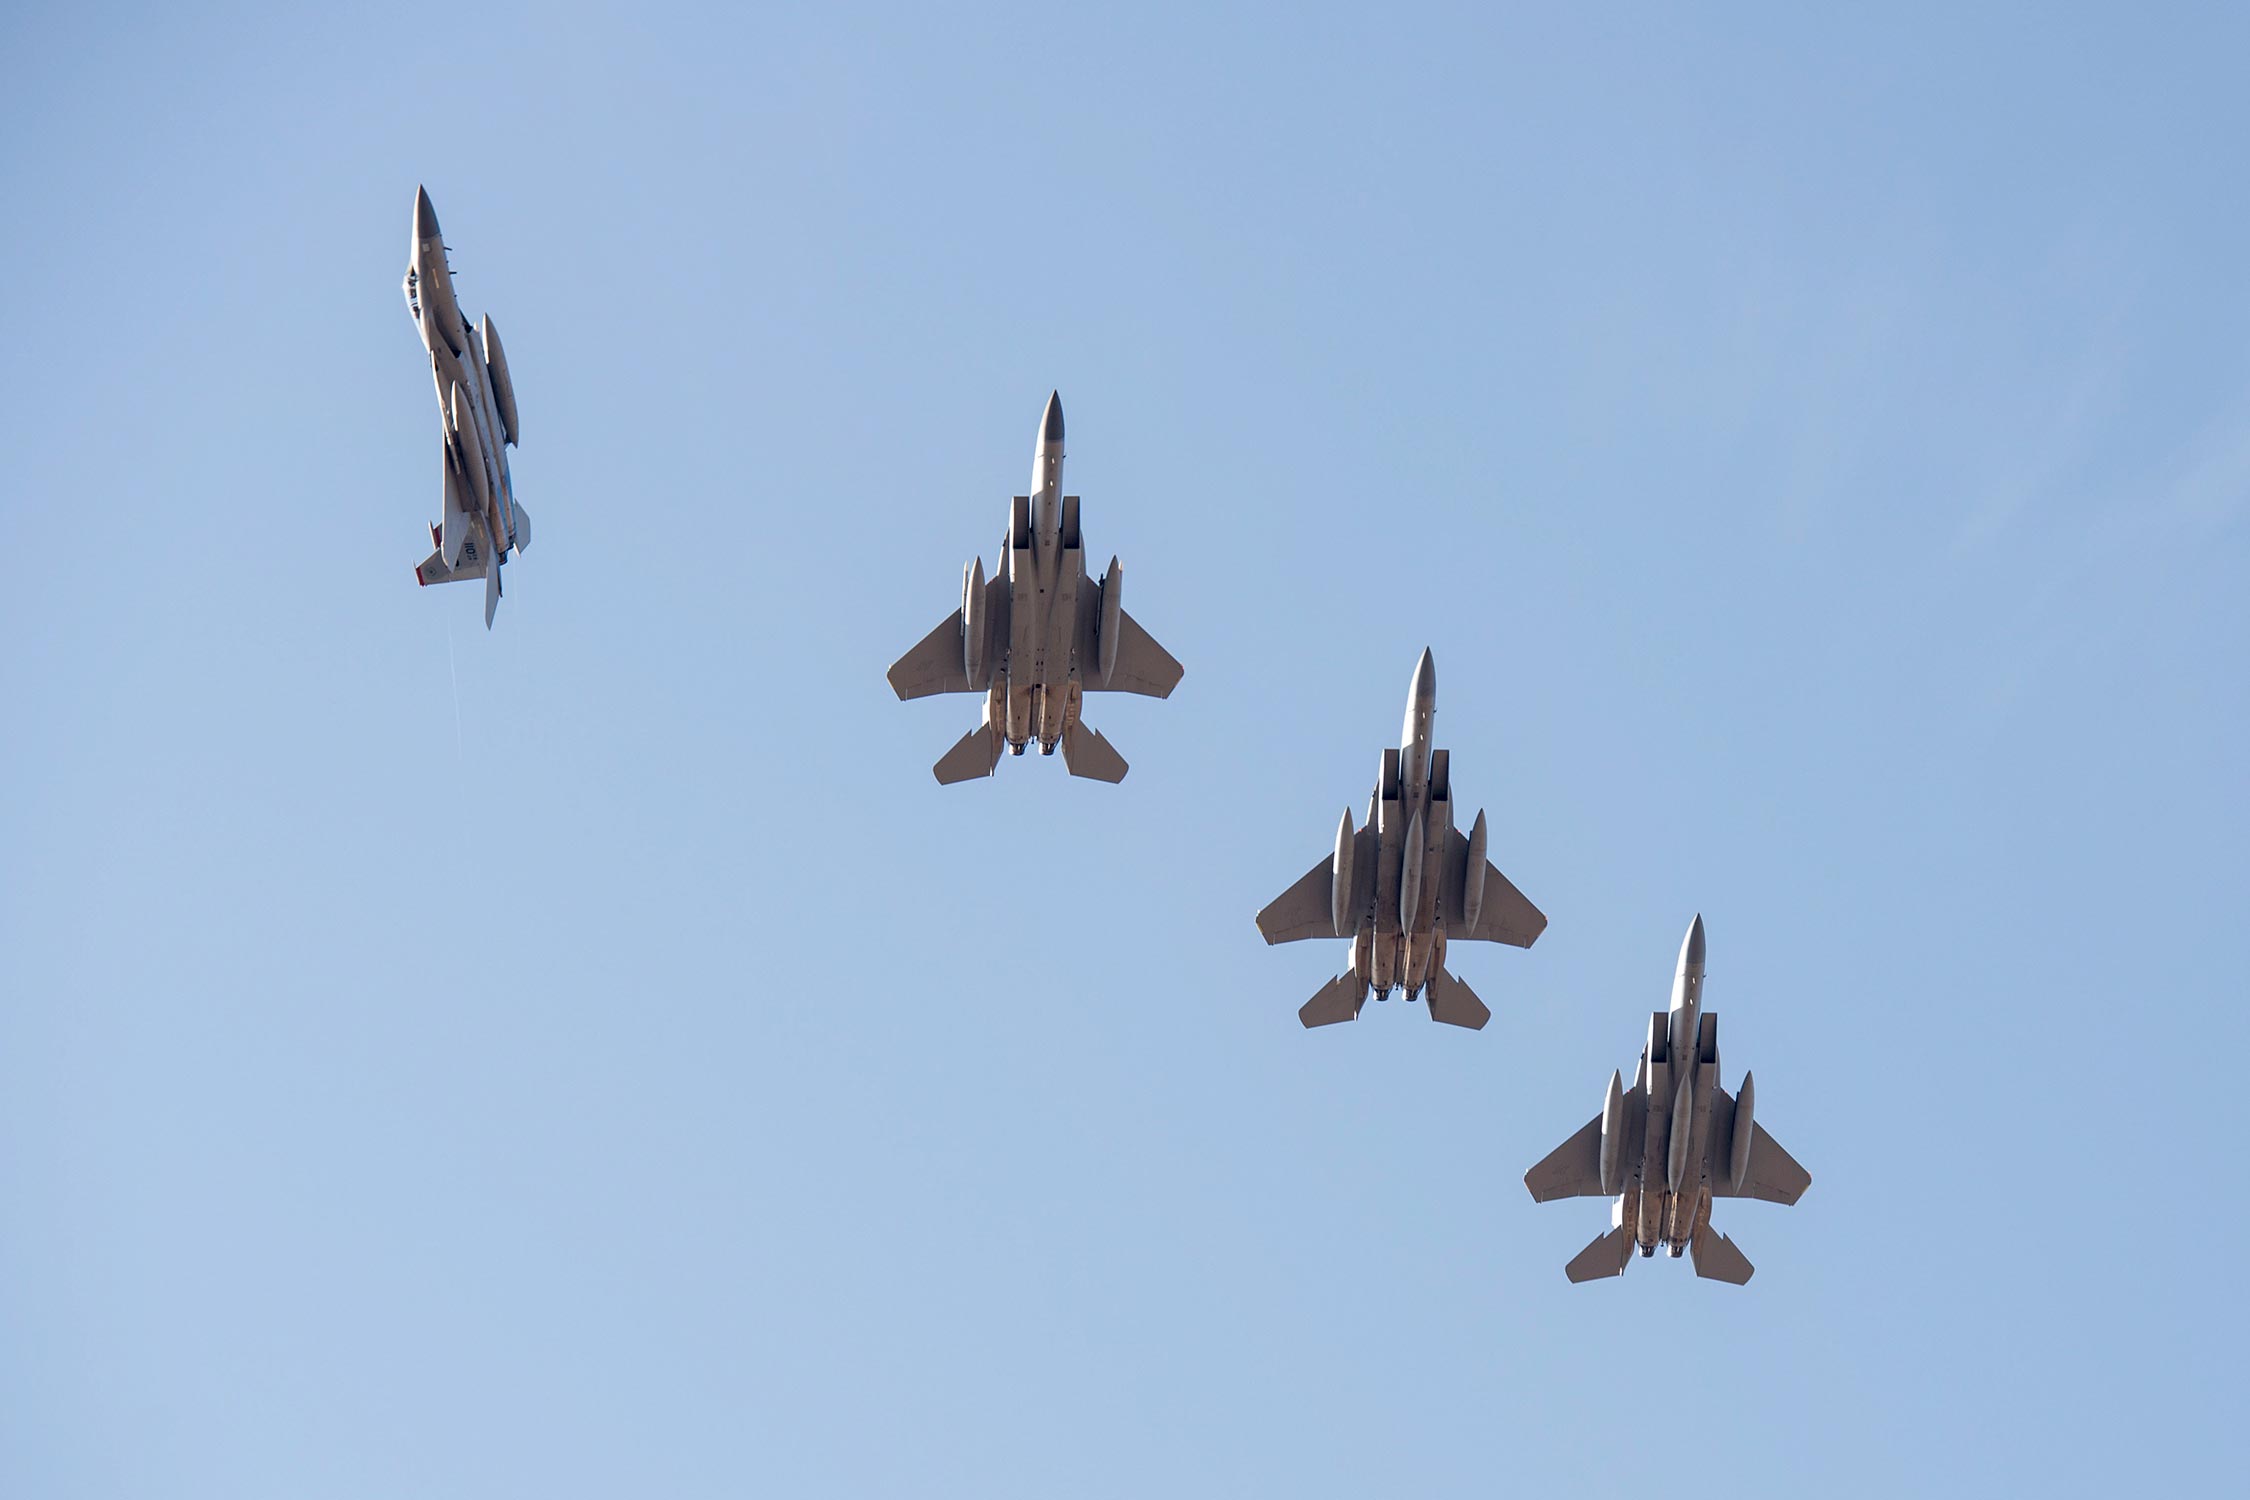 F-15 fighters at Exercise Vigilant Ace in South Korea in 2017